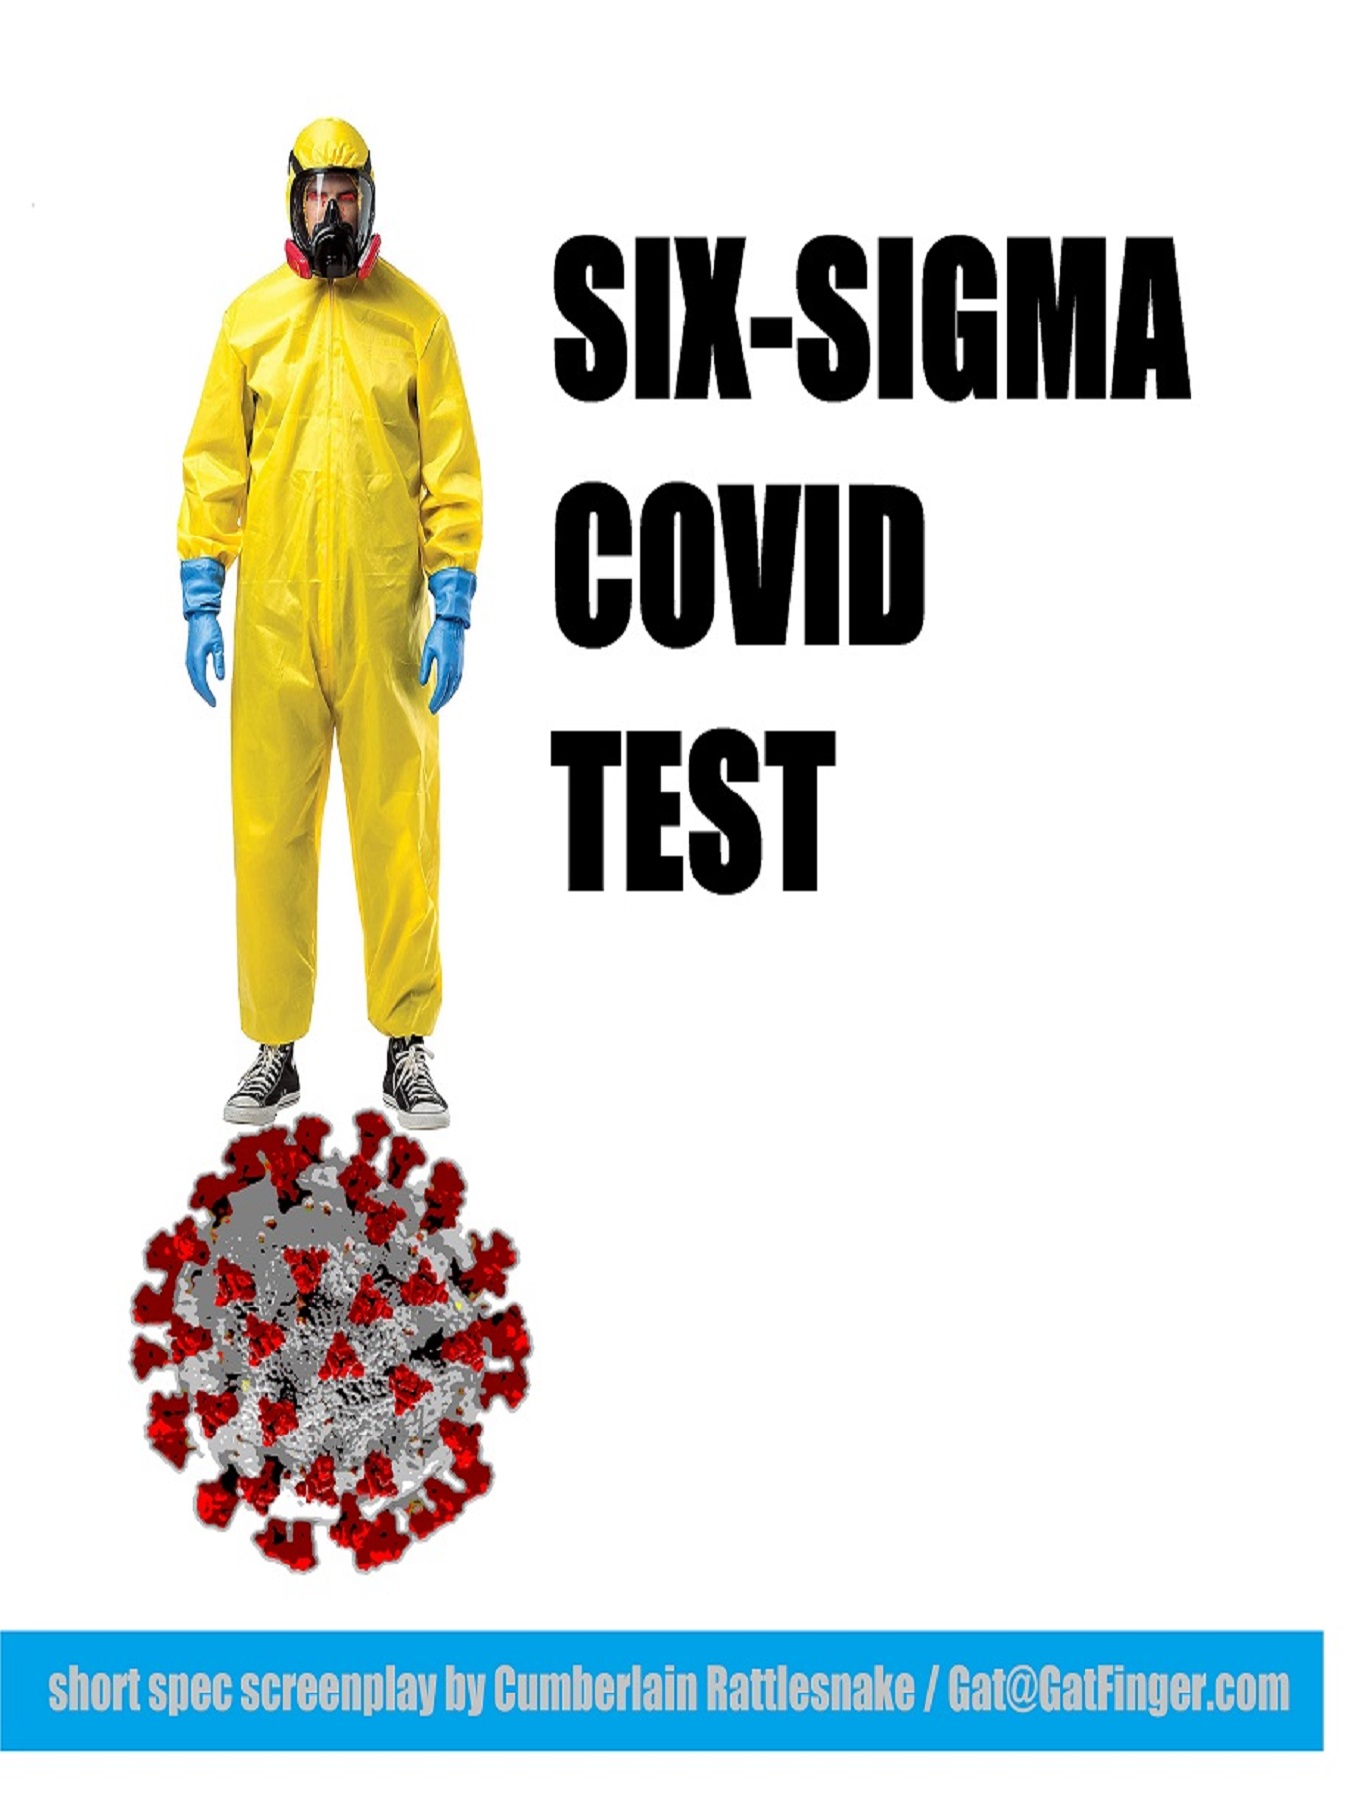 Simple and low-cost home-test announced for the detection of the Covid virus https://youtu.be/d4x4yLGnD1g